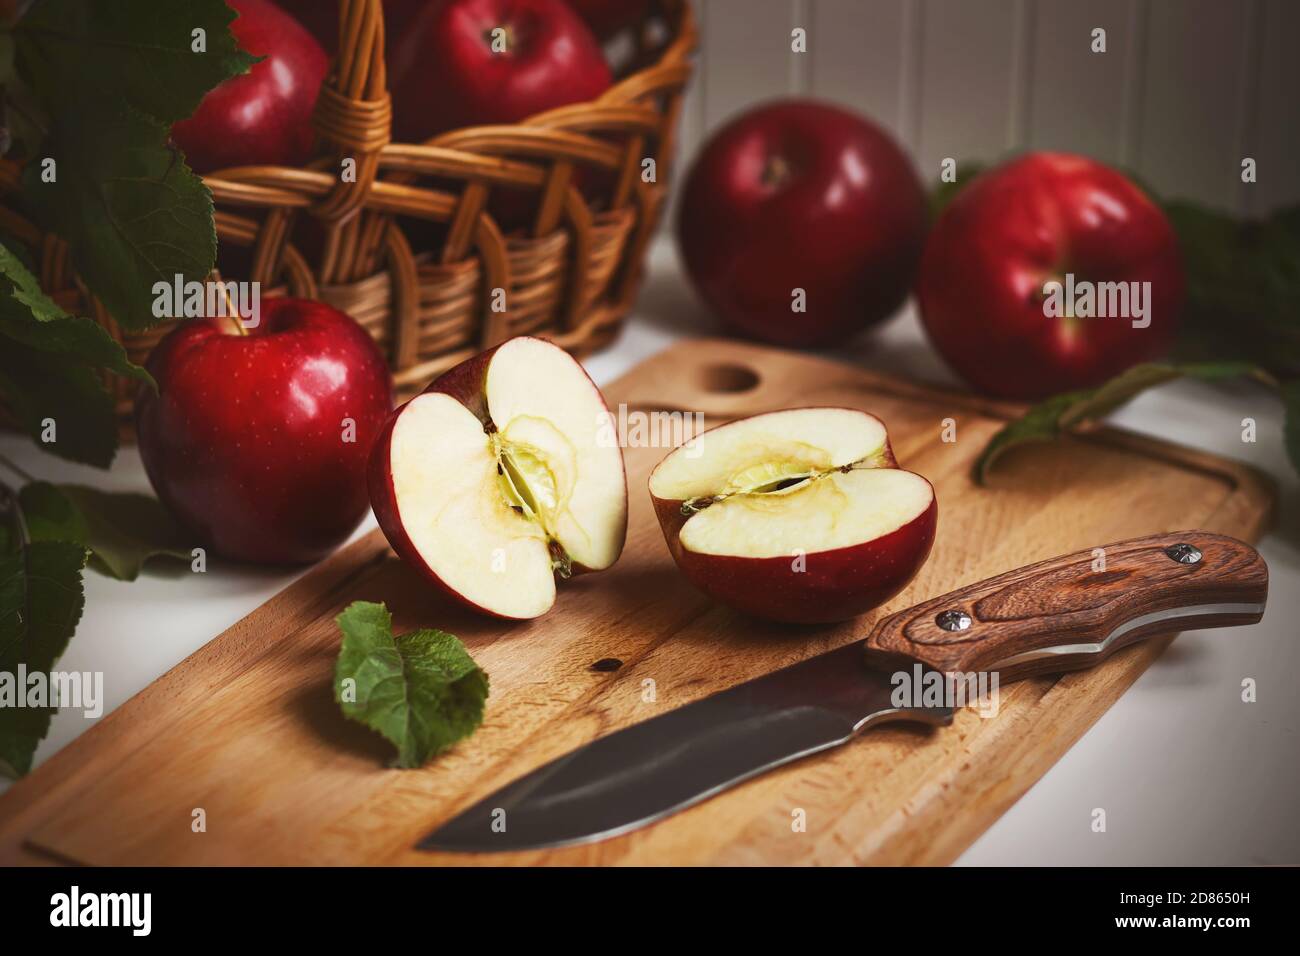 On the kitchen table still life - wicker basket with red ripe sweet apples, next to it a wooden board on which lies an Apple cut in half and a sharp k Stock Photo